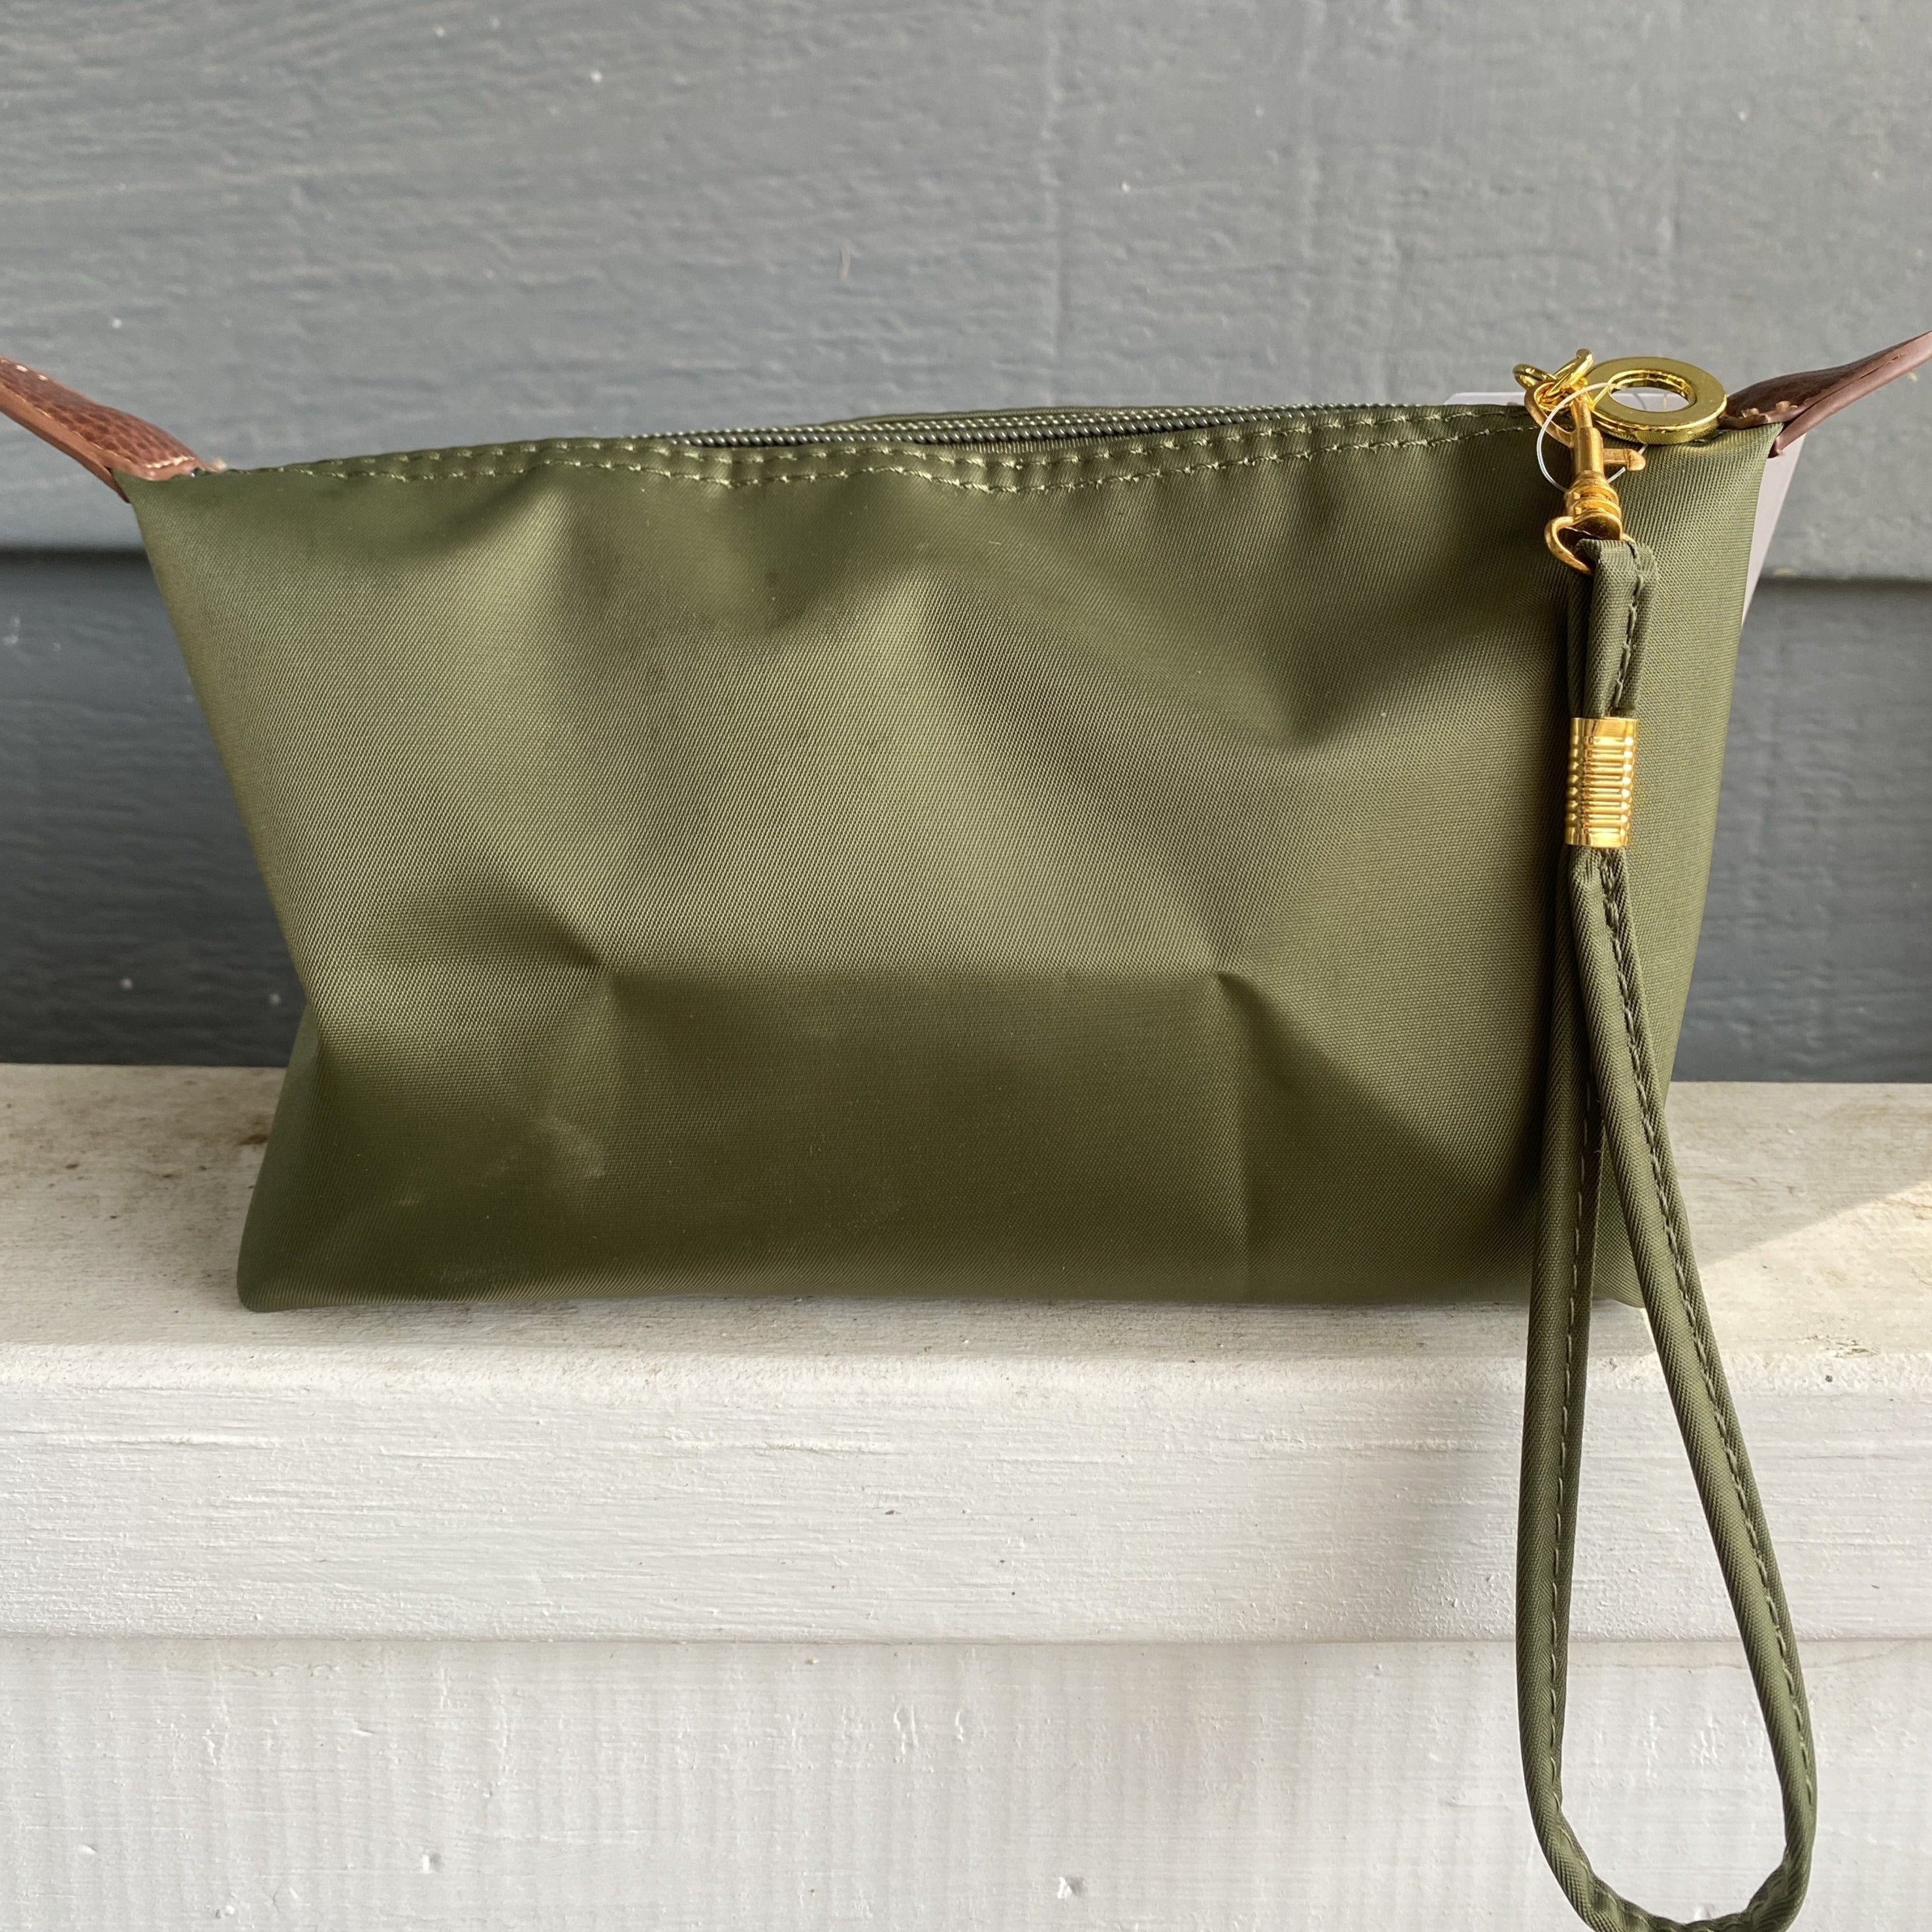 Small Essentials Bag with Wristlet Strap